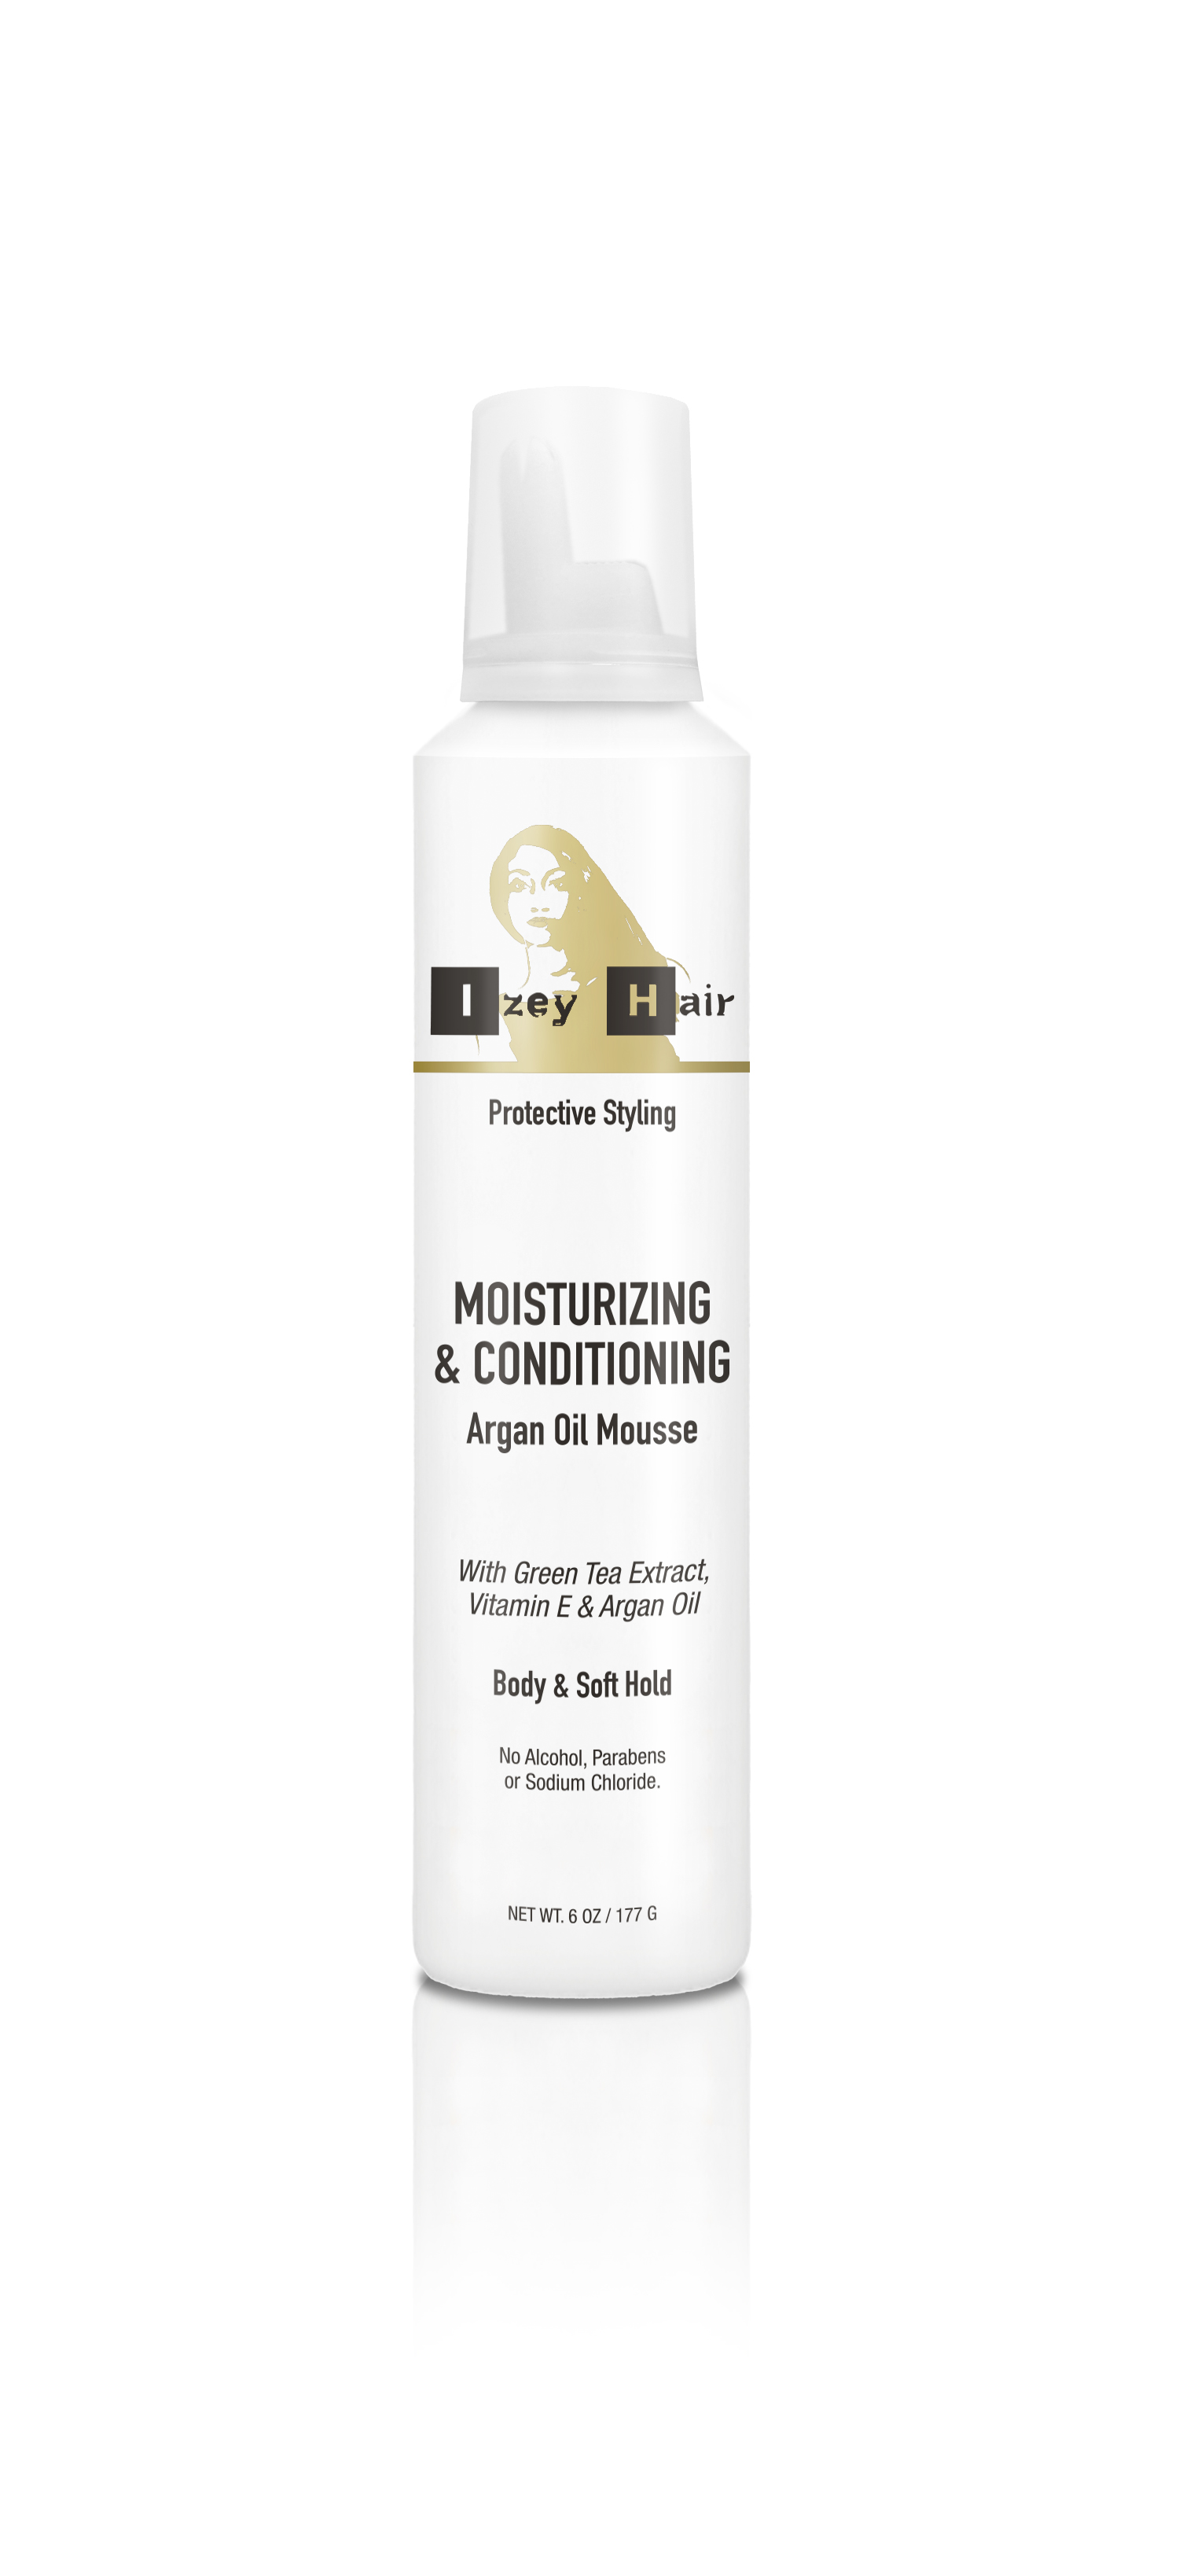 Izey Hair Moisturizing and Conditioning Argan Oil Mousse